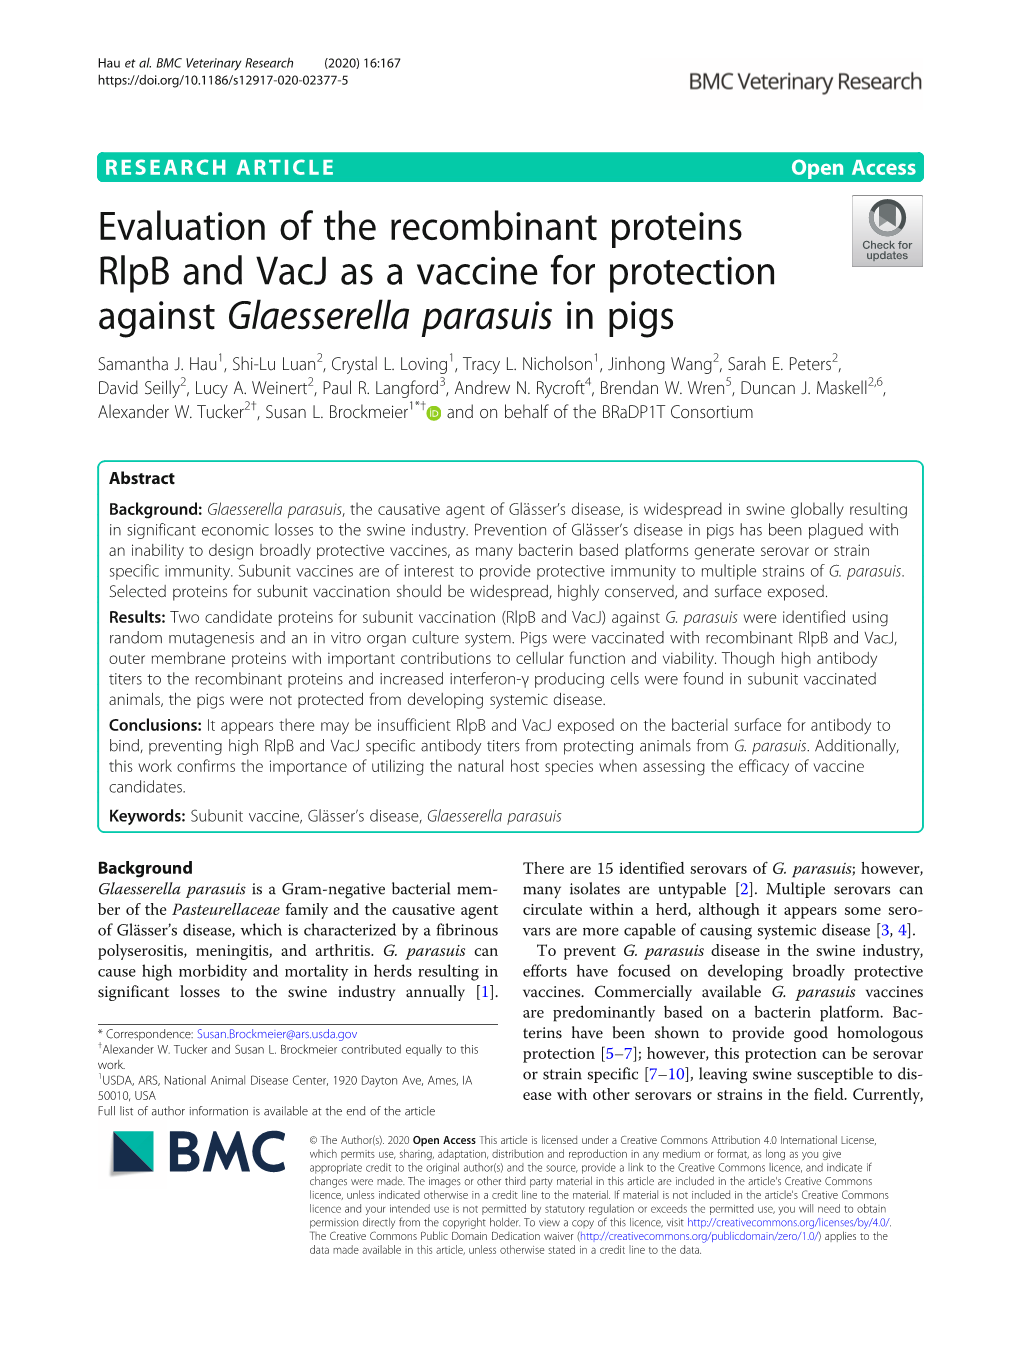 Evaluation of the Recombinant Proteins Rlpb and Vacj As a Vaccine for Protection Against Glaesserella Parasuis in Pigs Samantha J